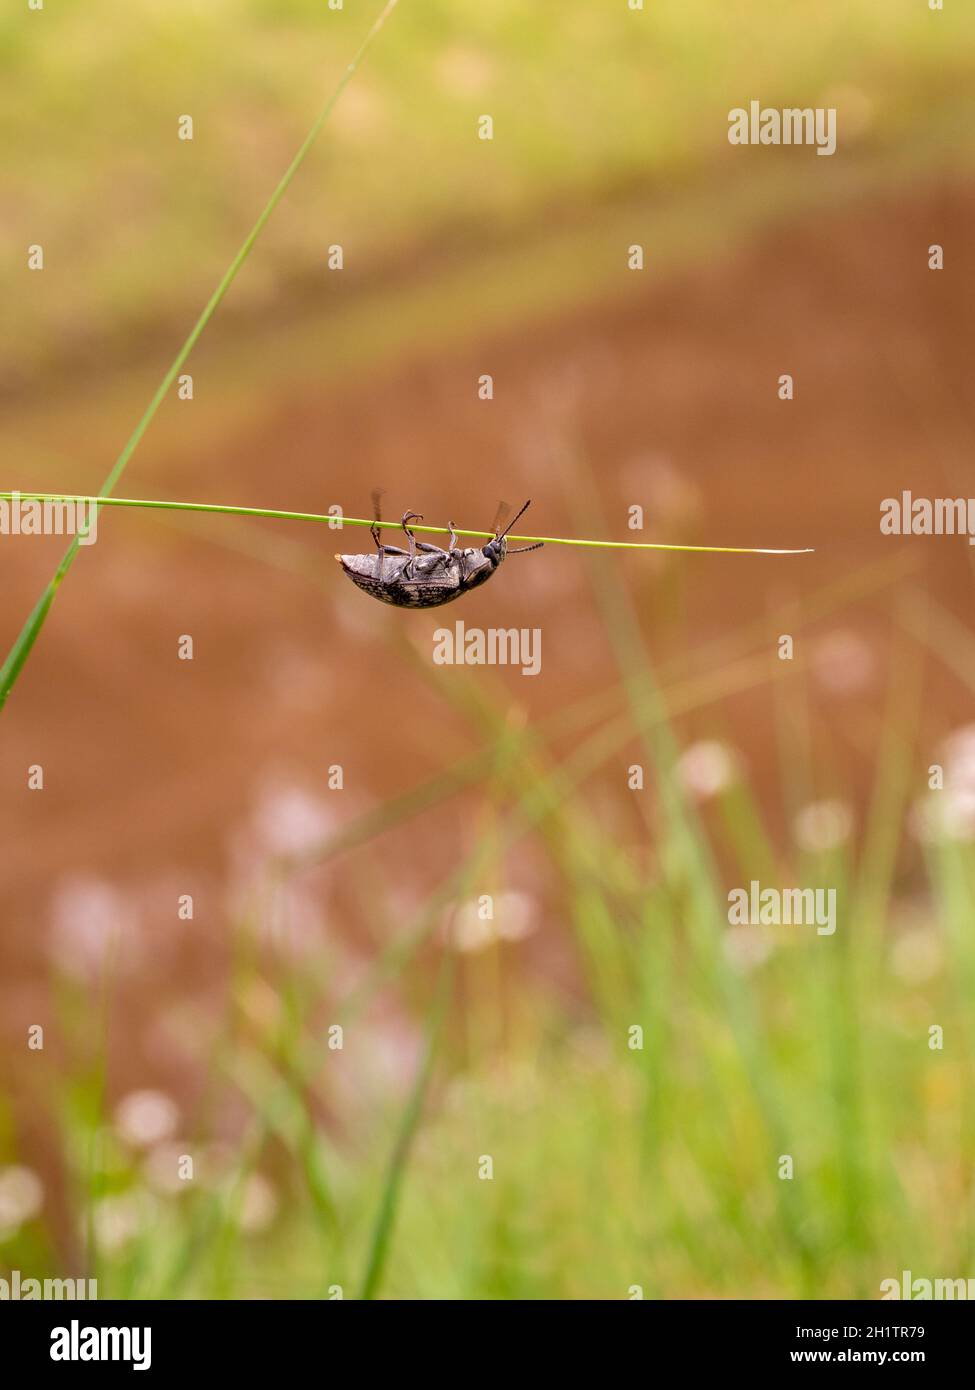 A Weevil on a grass stem in Victoria, Australia Stock Photo